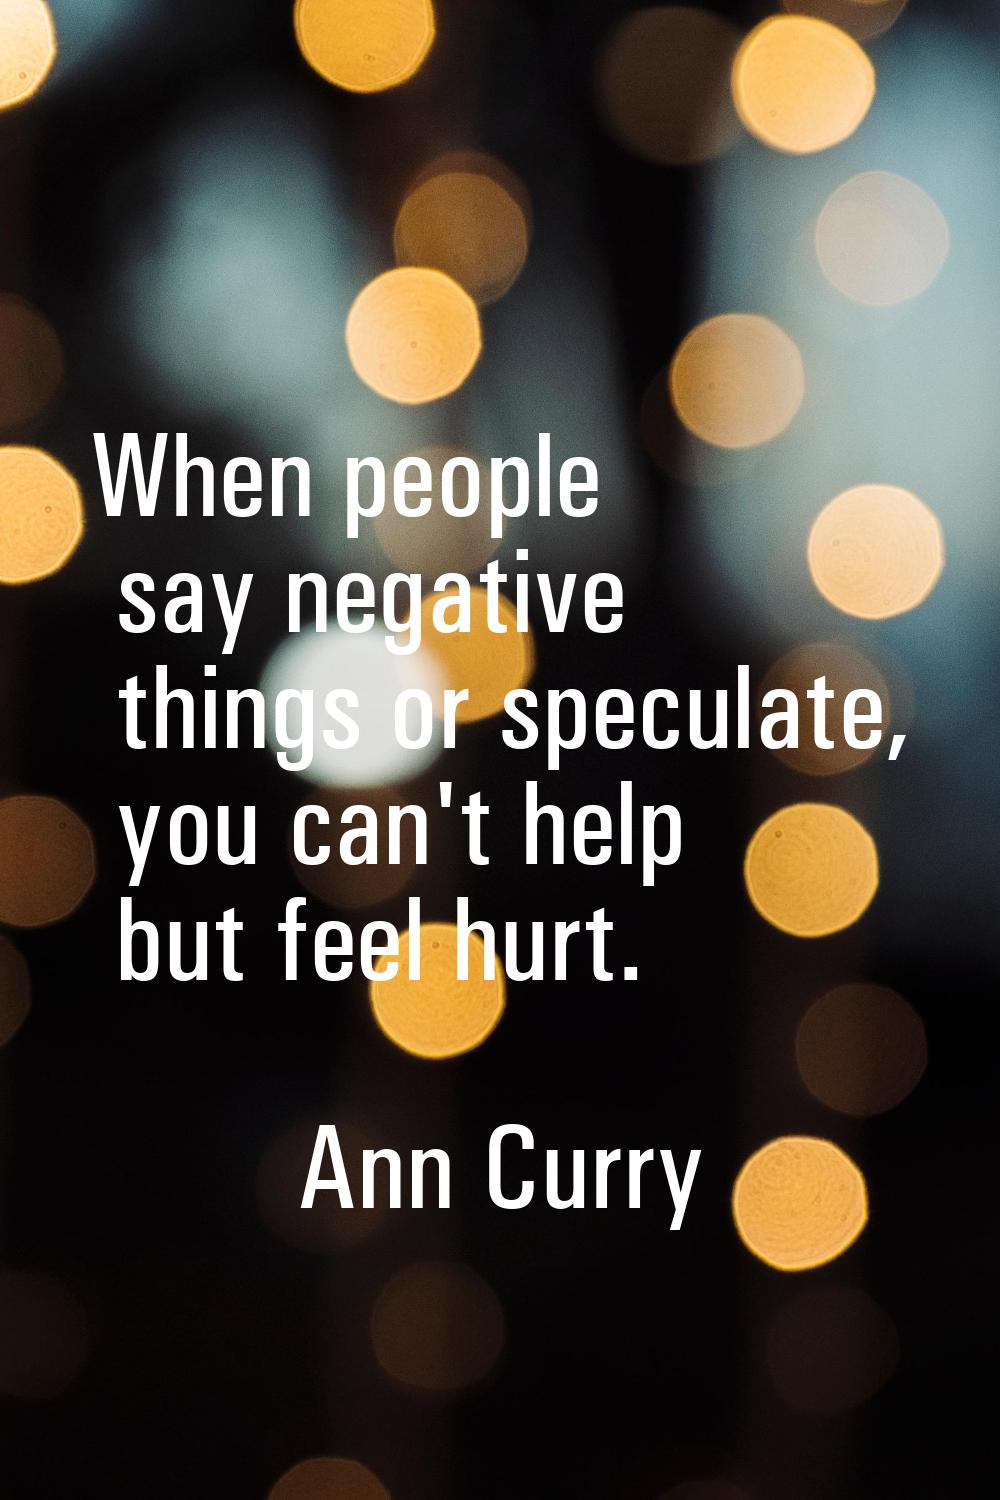 When people say negative things or speculate, you can't help but feel hurt.